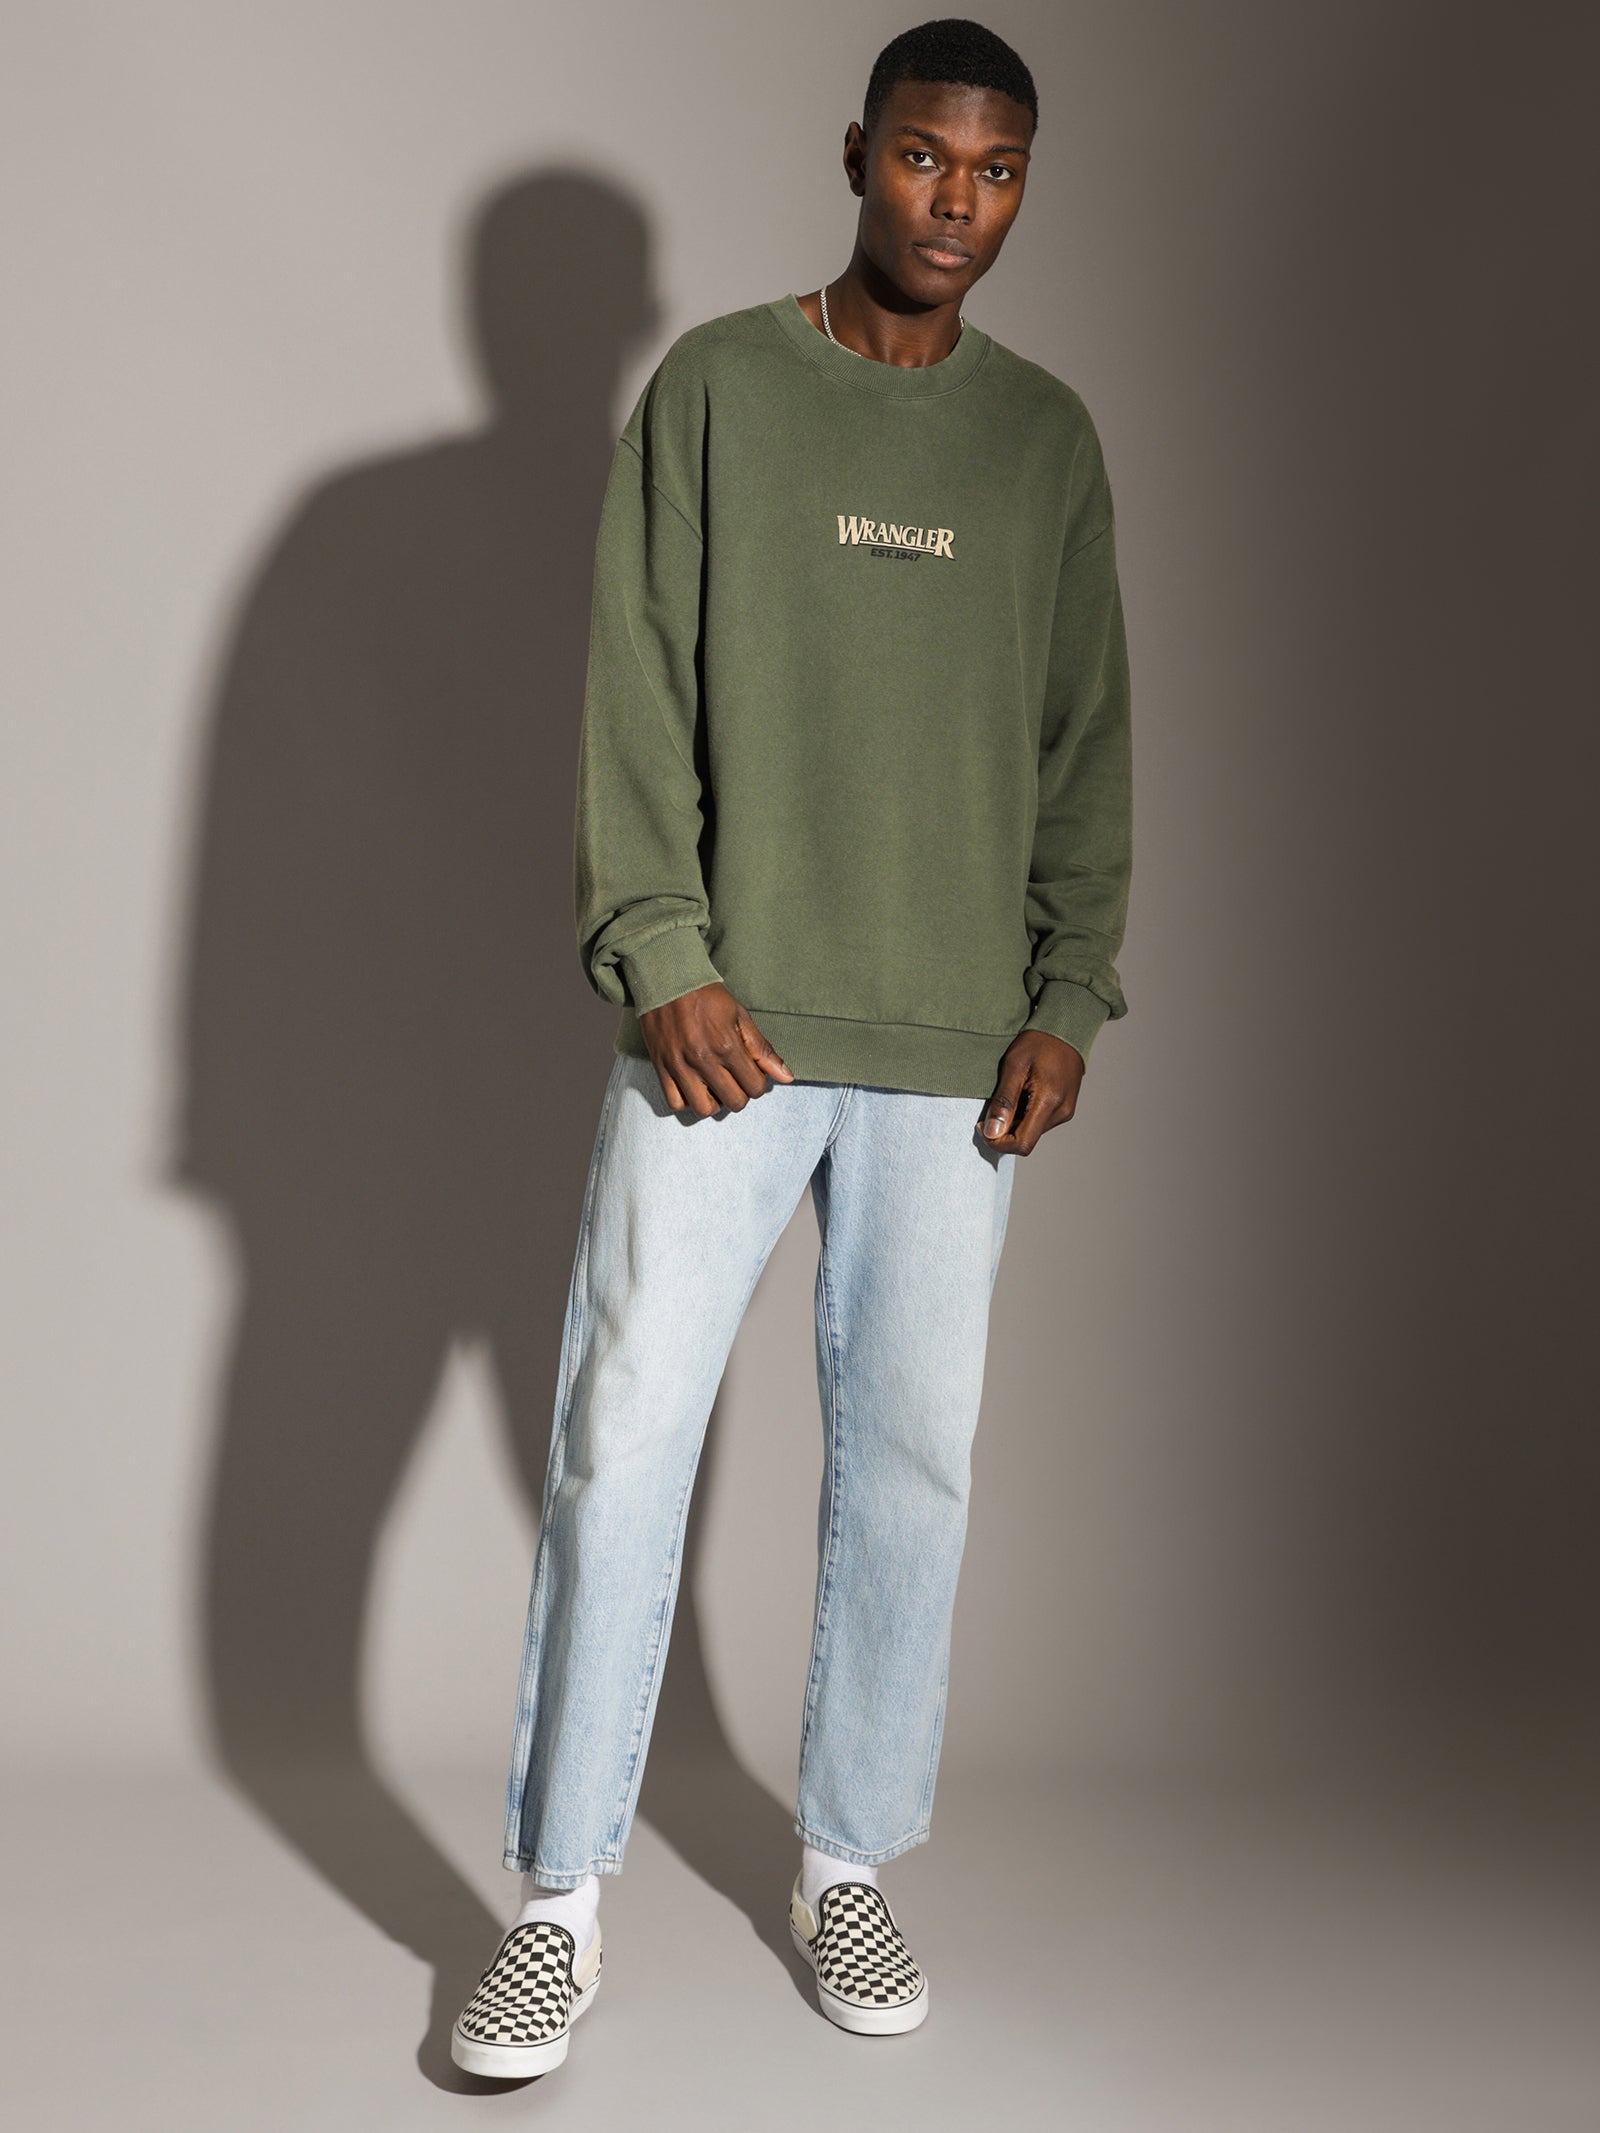 Wrangler Sweater in Pine Forest Green - Glue Store NZ